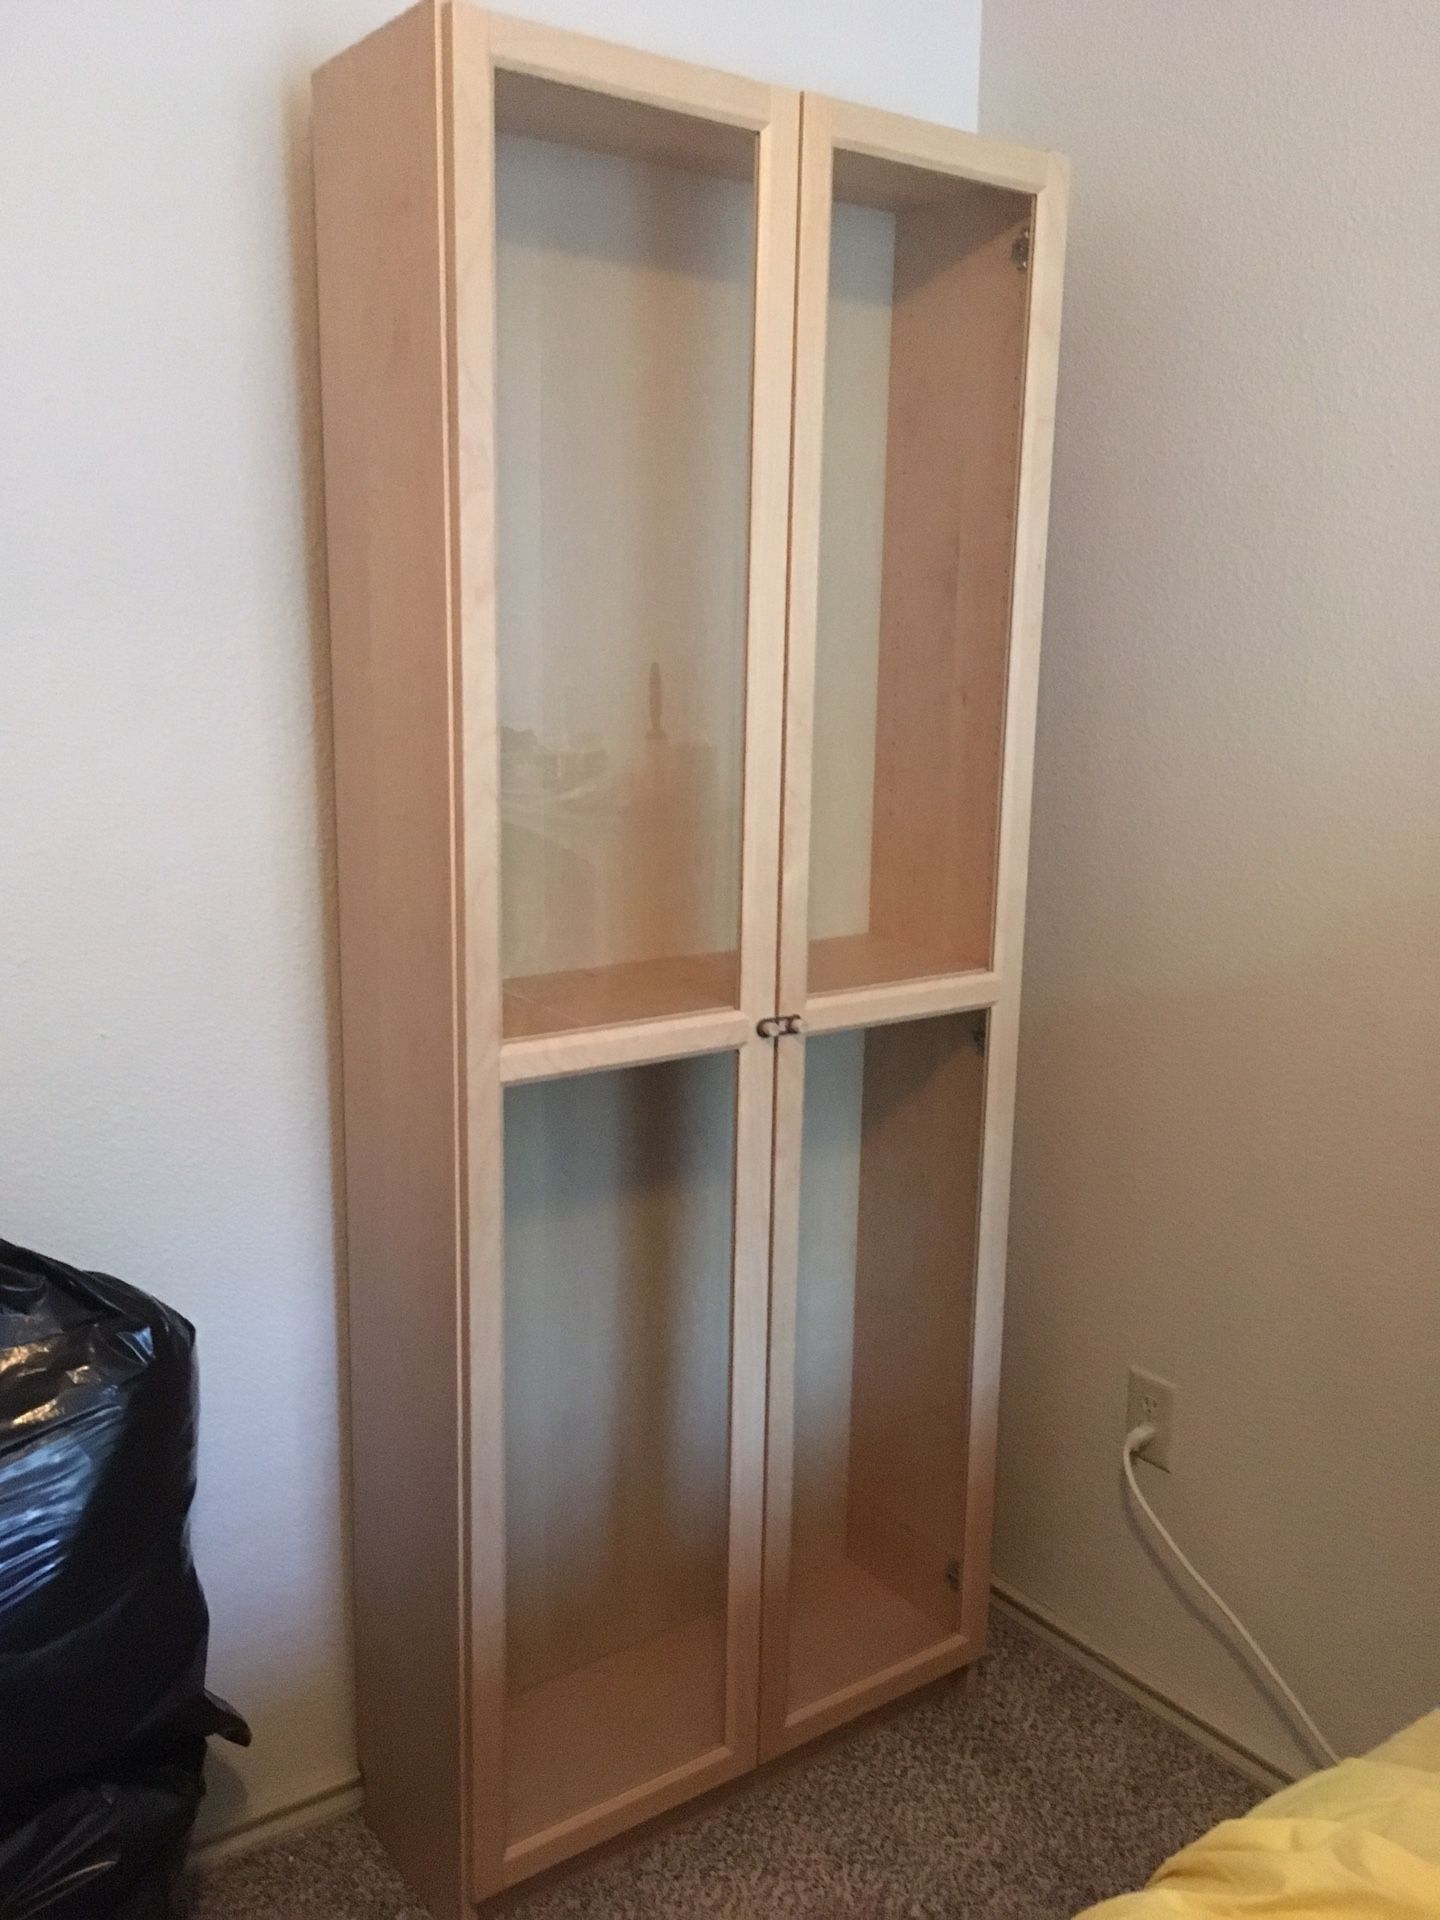 IKEA Billy bookcase with glass doors